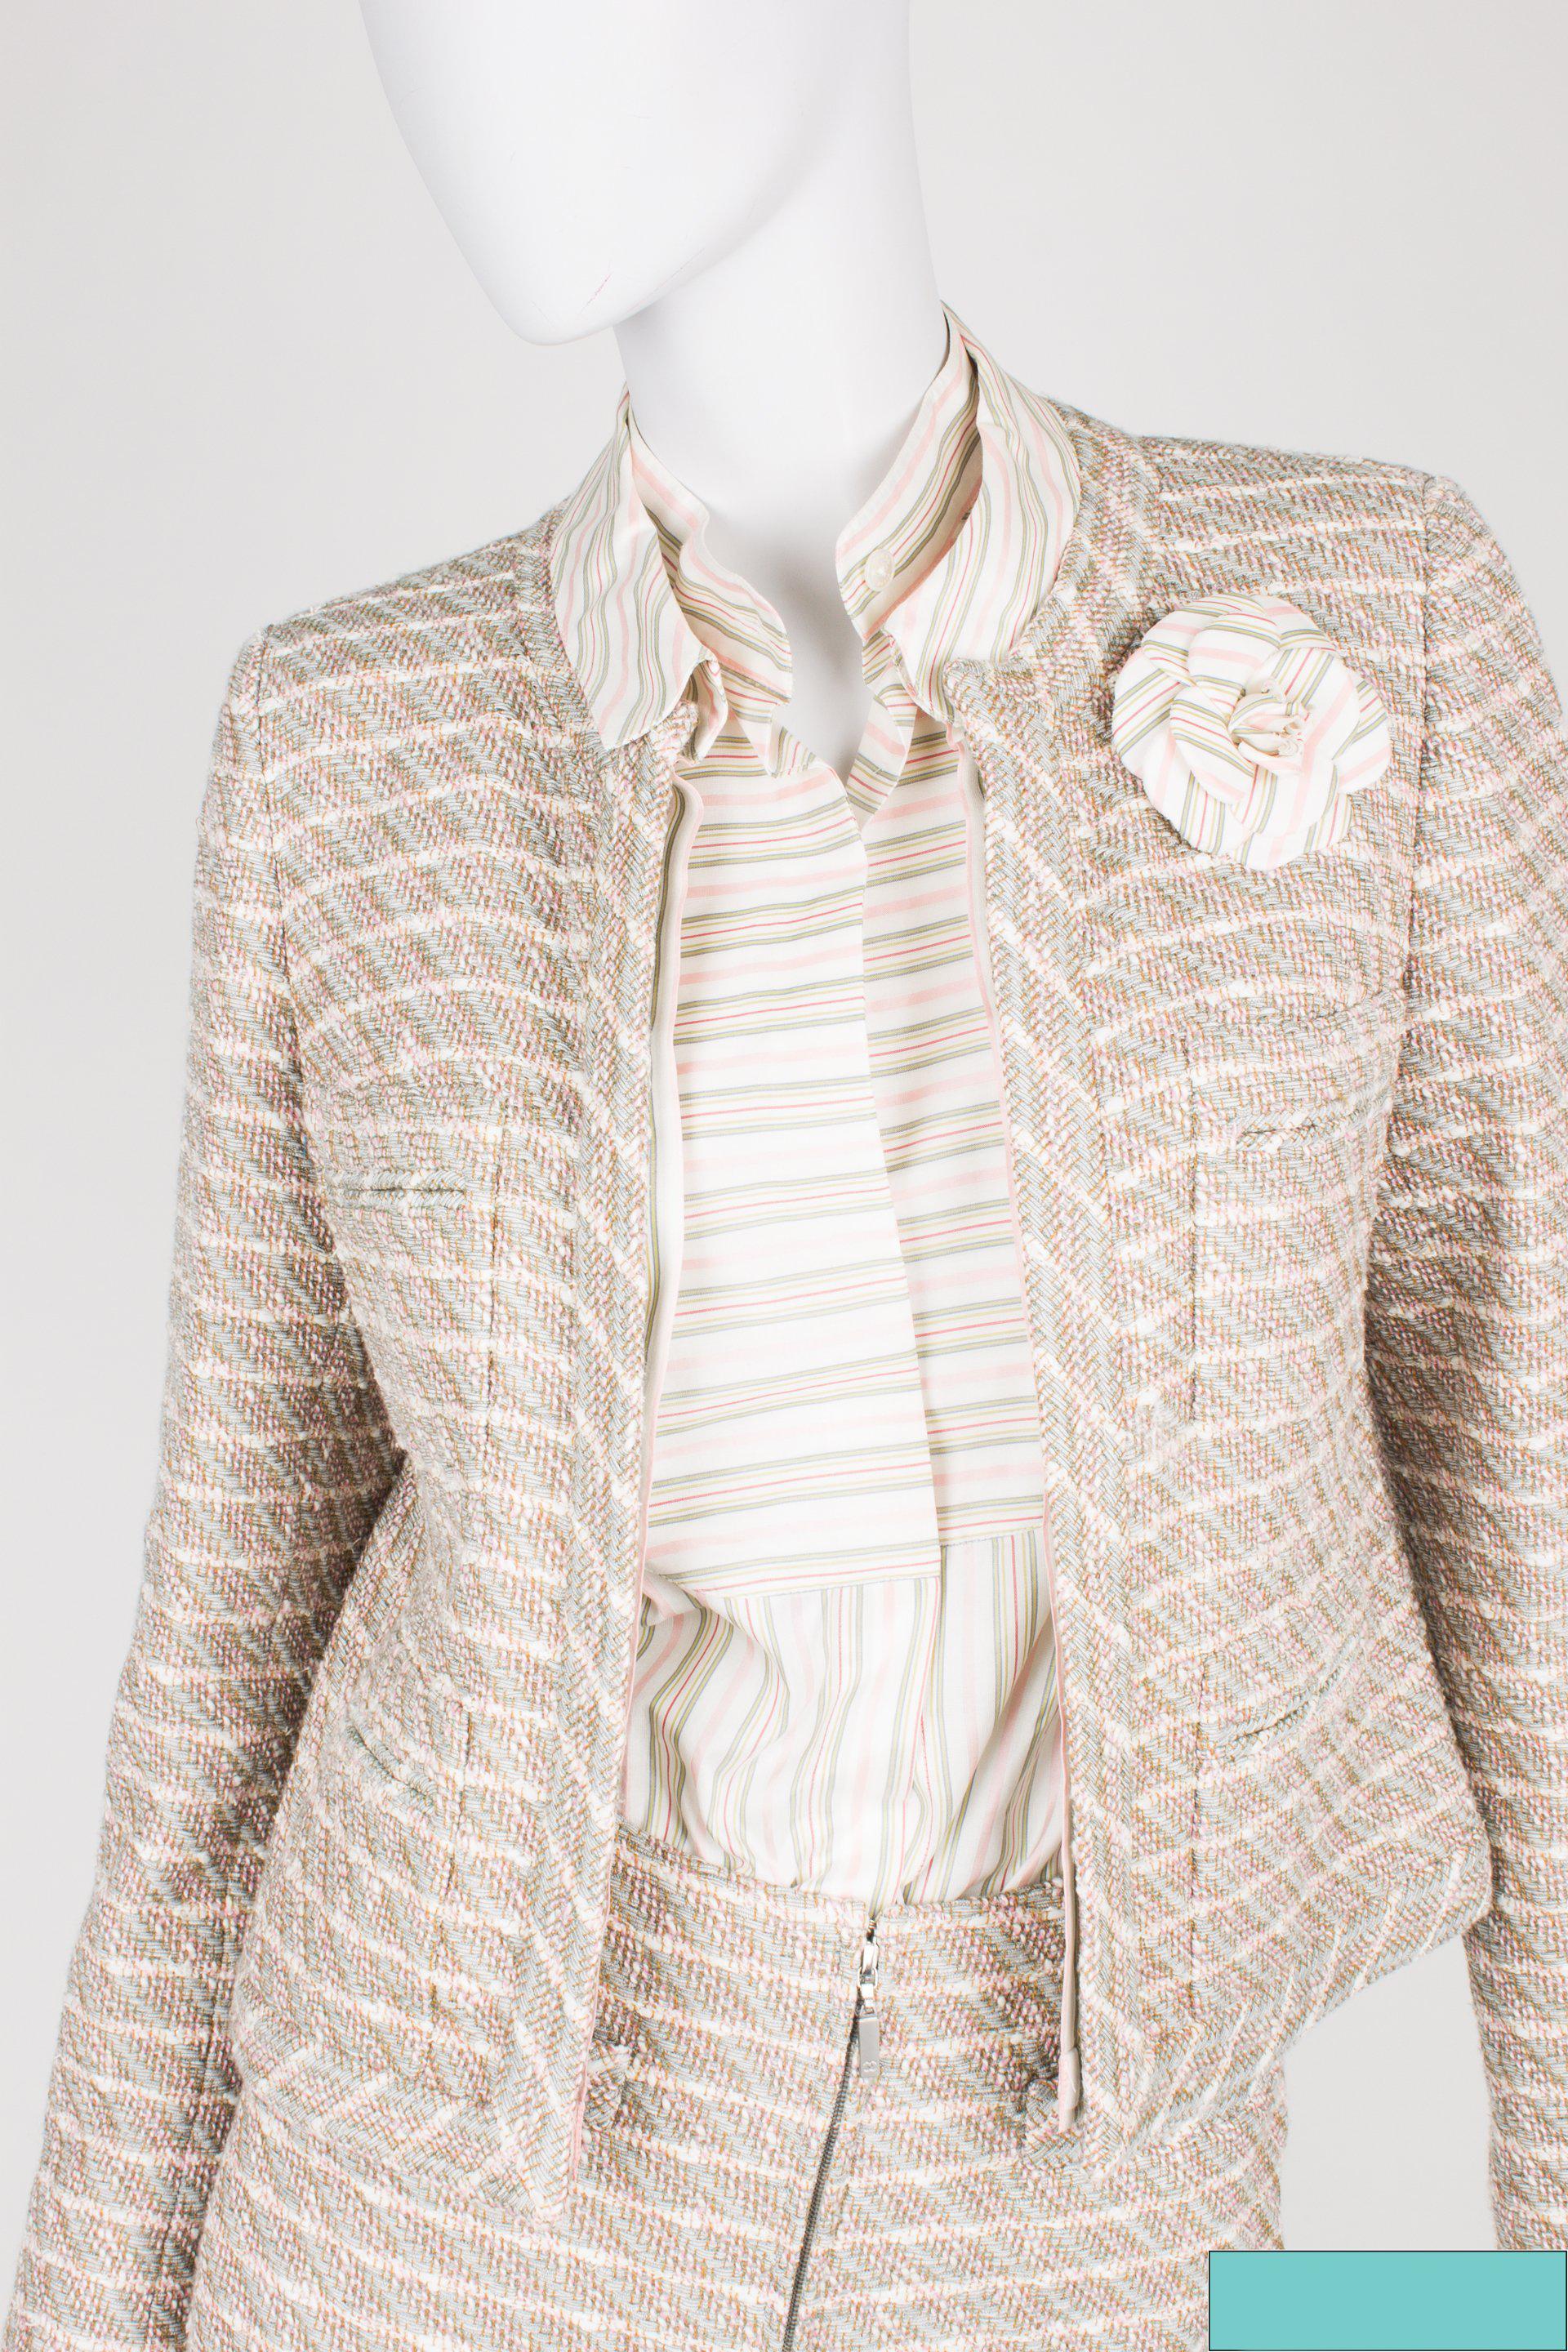 Chanel 3-pcs Suit Jacket, Skirt & Blouse - pink/green/gray/off-white 2003 For Sale 1